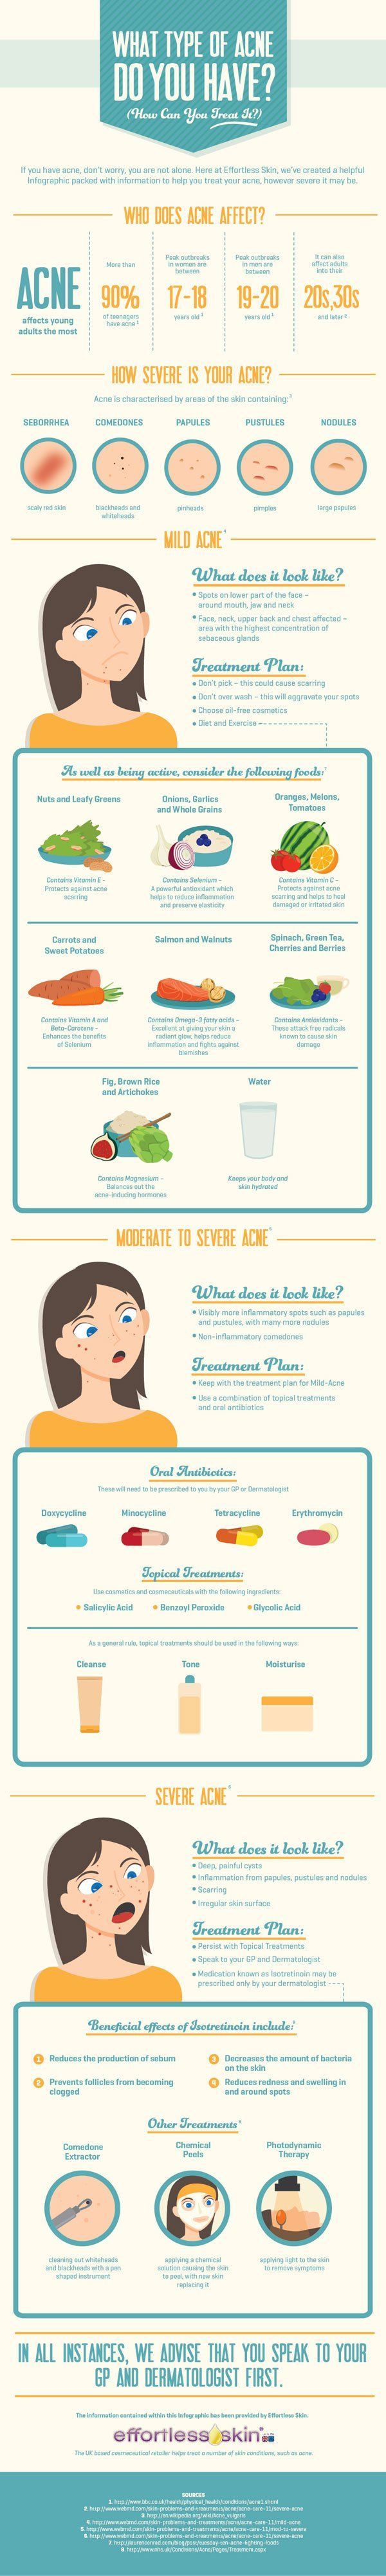 Different Types Of Acne & How To Get Rid Of It, check it out at makeuptutorials....